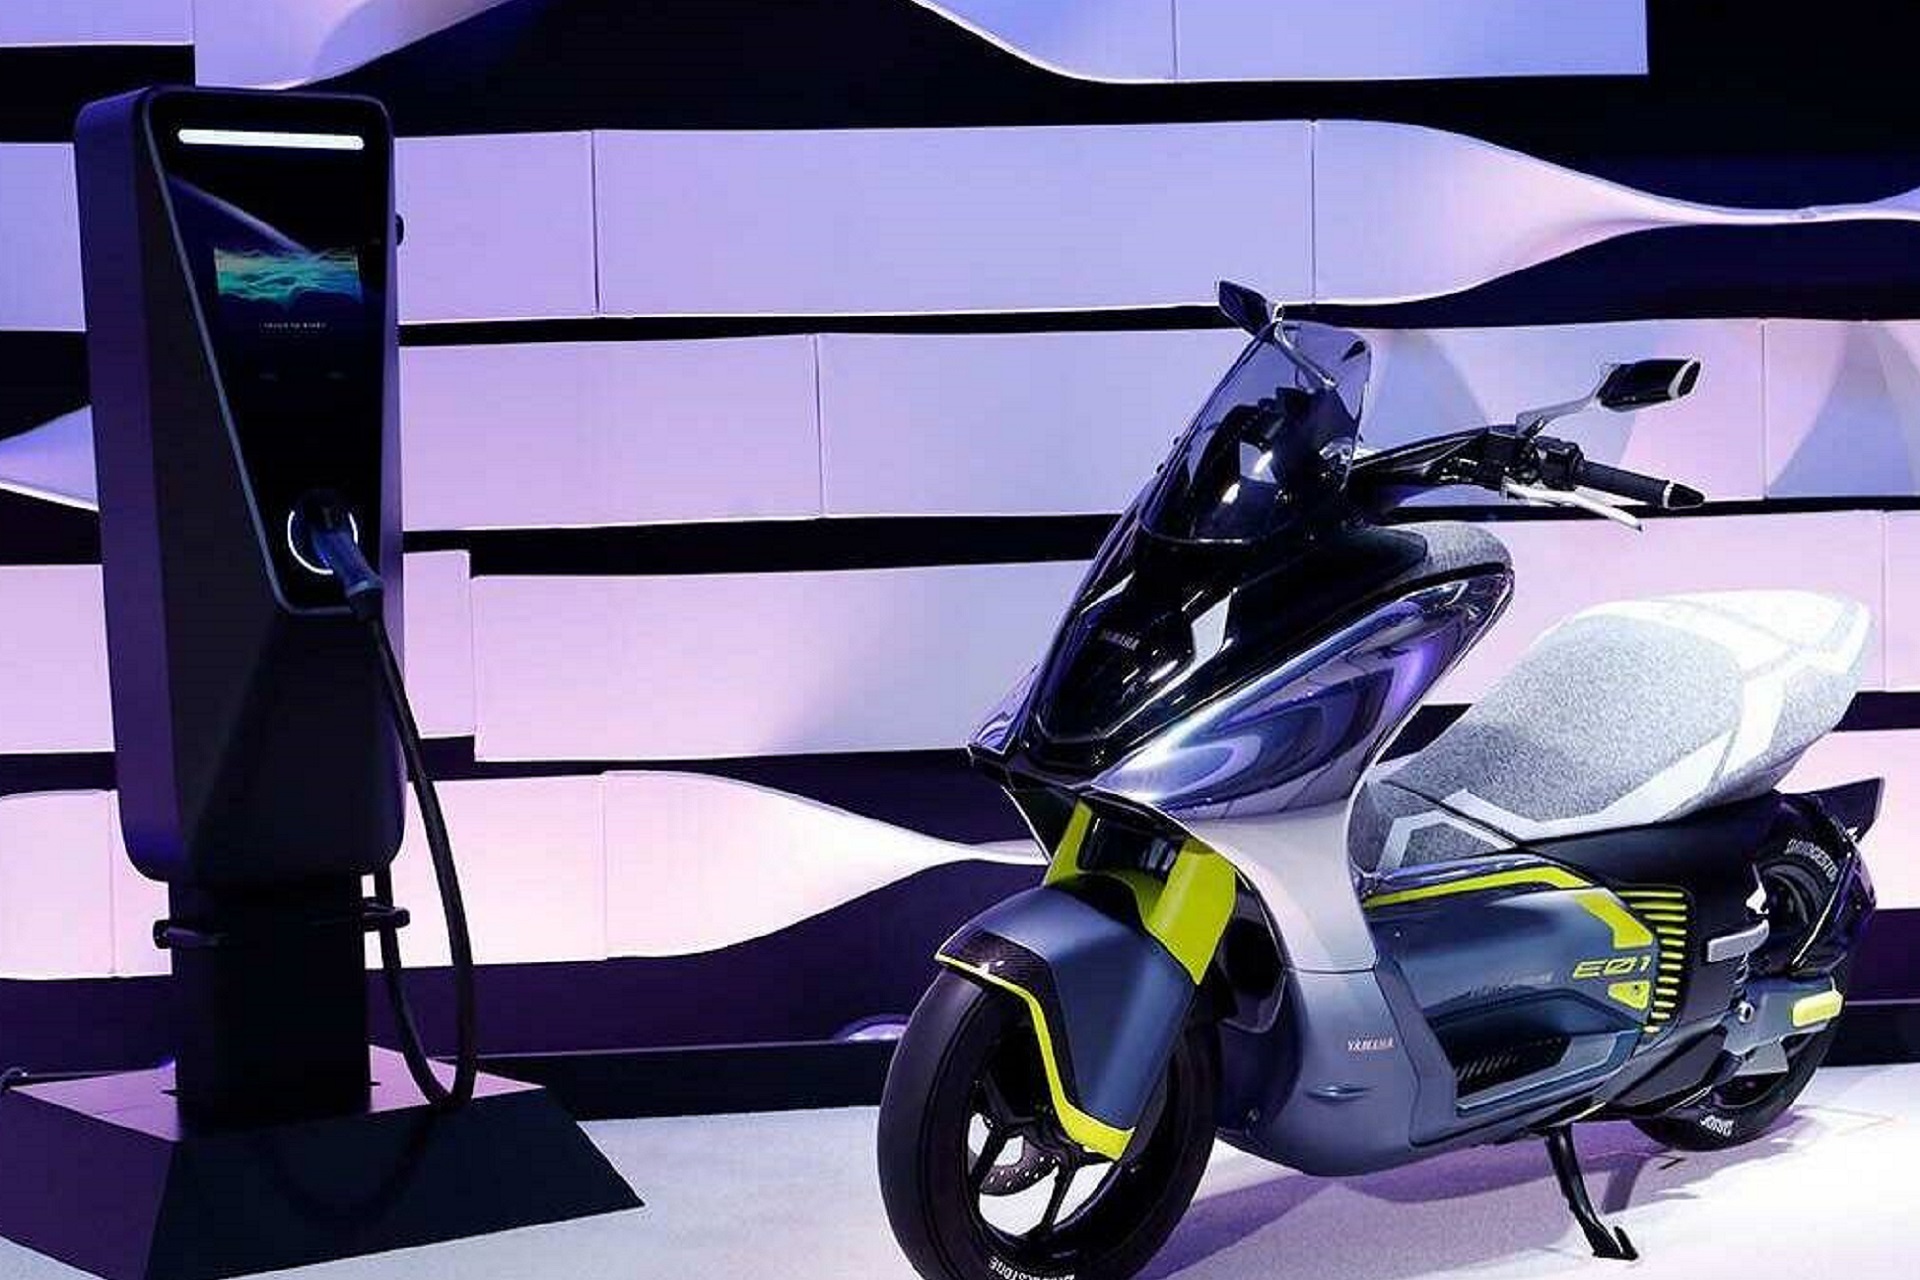 Here Is How Yamaha Is Expanding In The Two-Wheeler Space